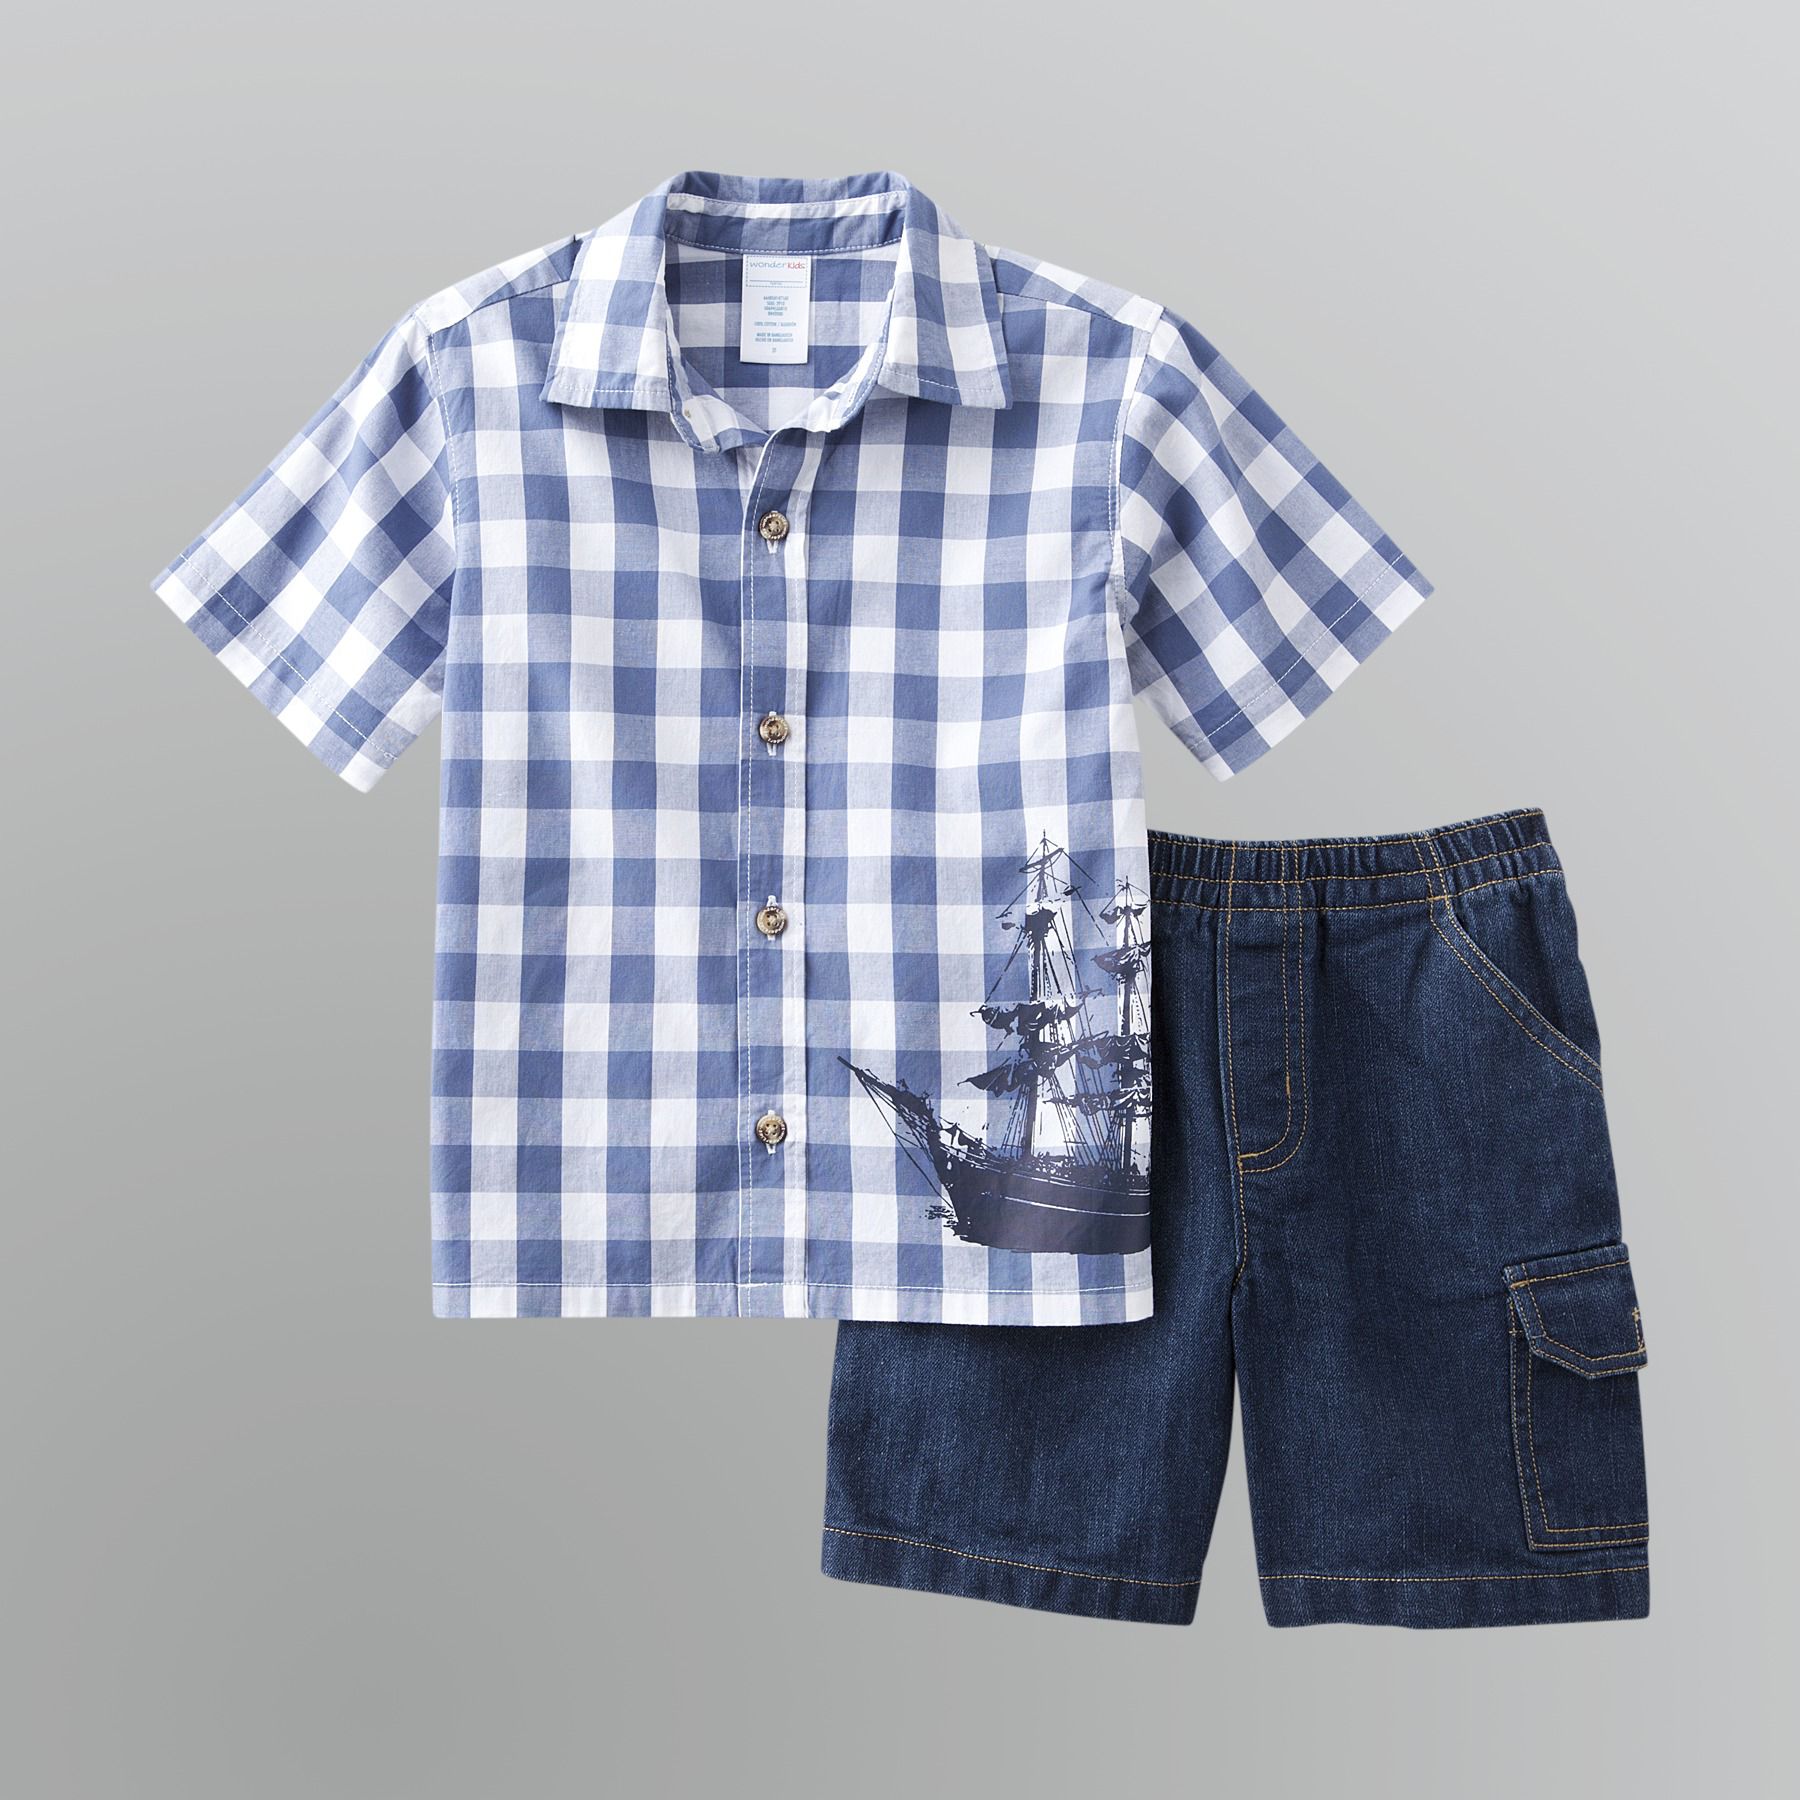 WonderKids Infant and Toddler Boy's Shirt and Shorts Set